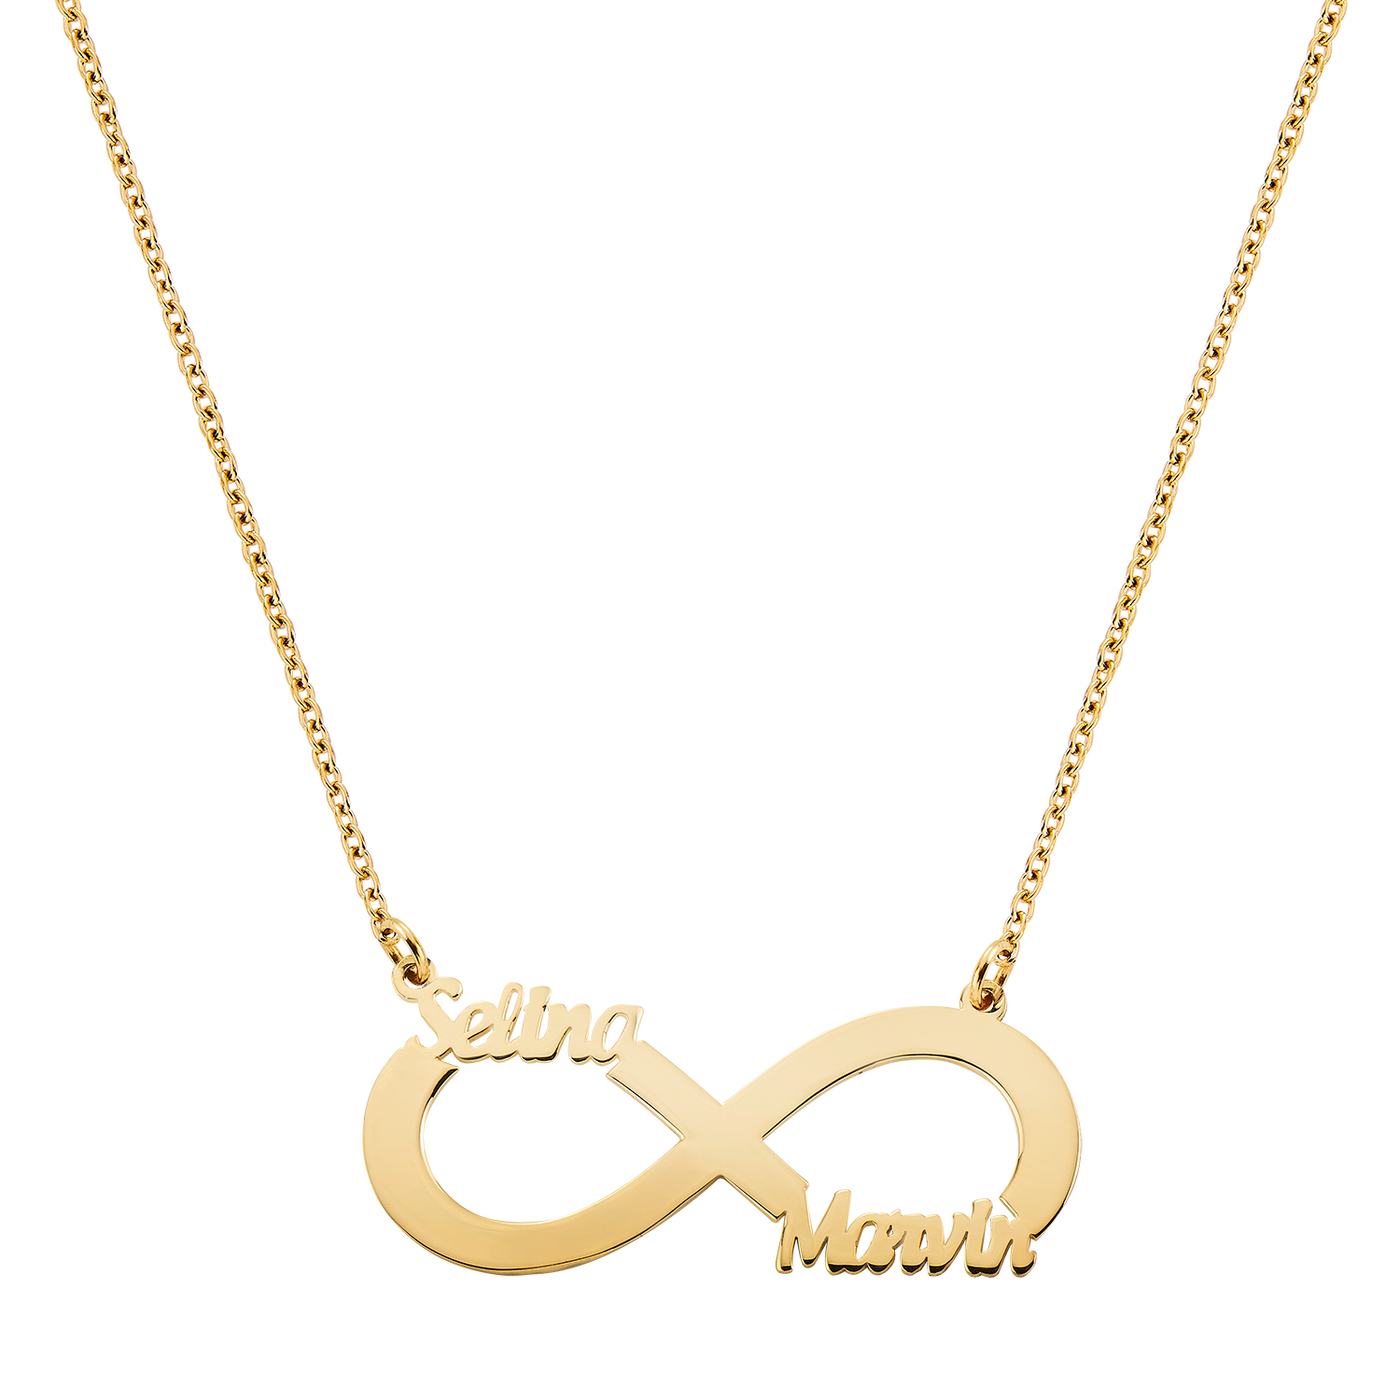 Infinity name necklace with name